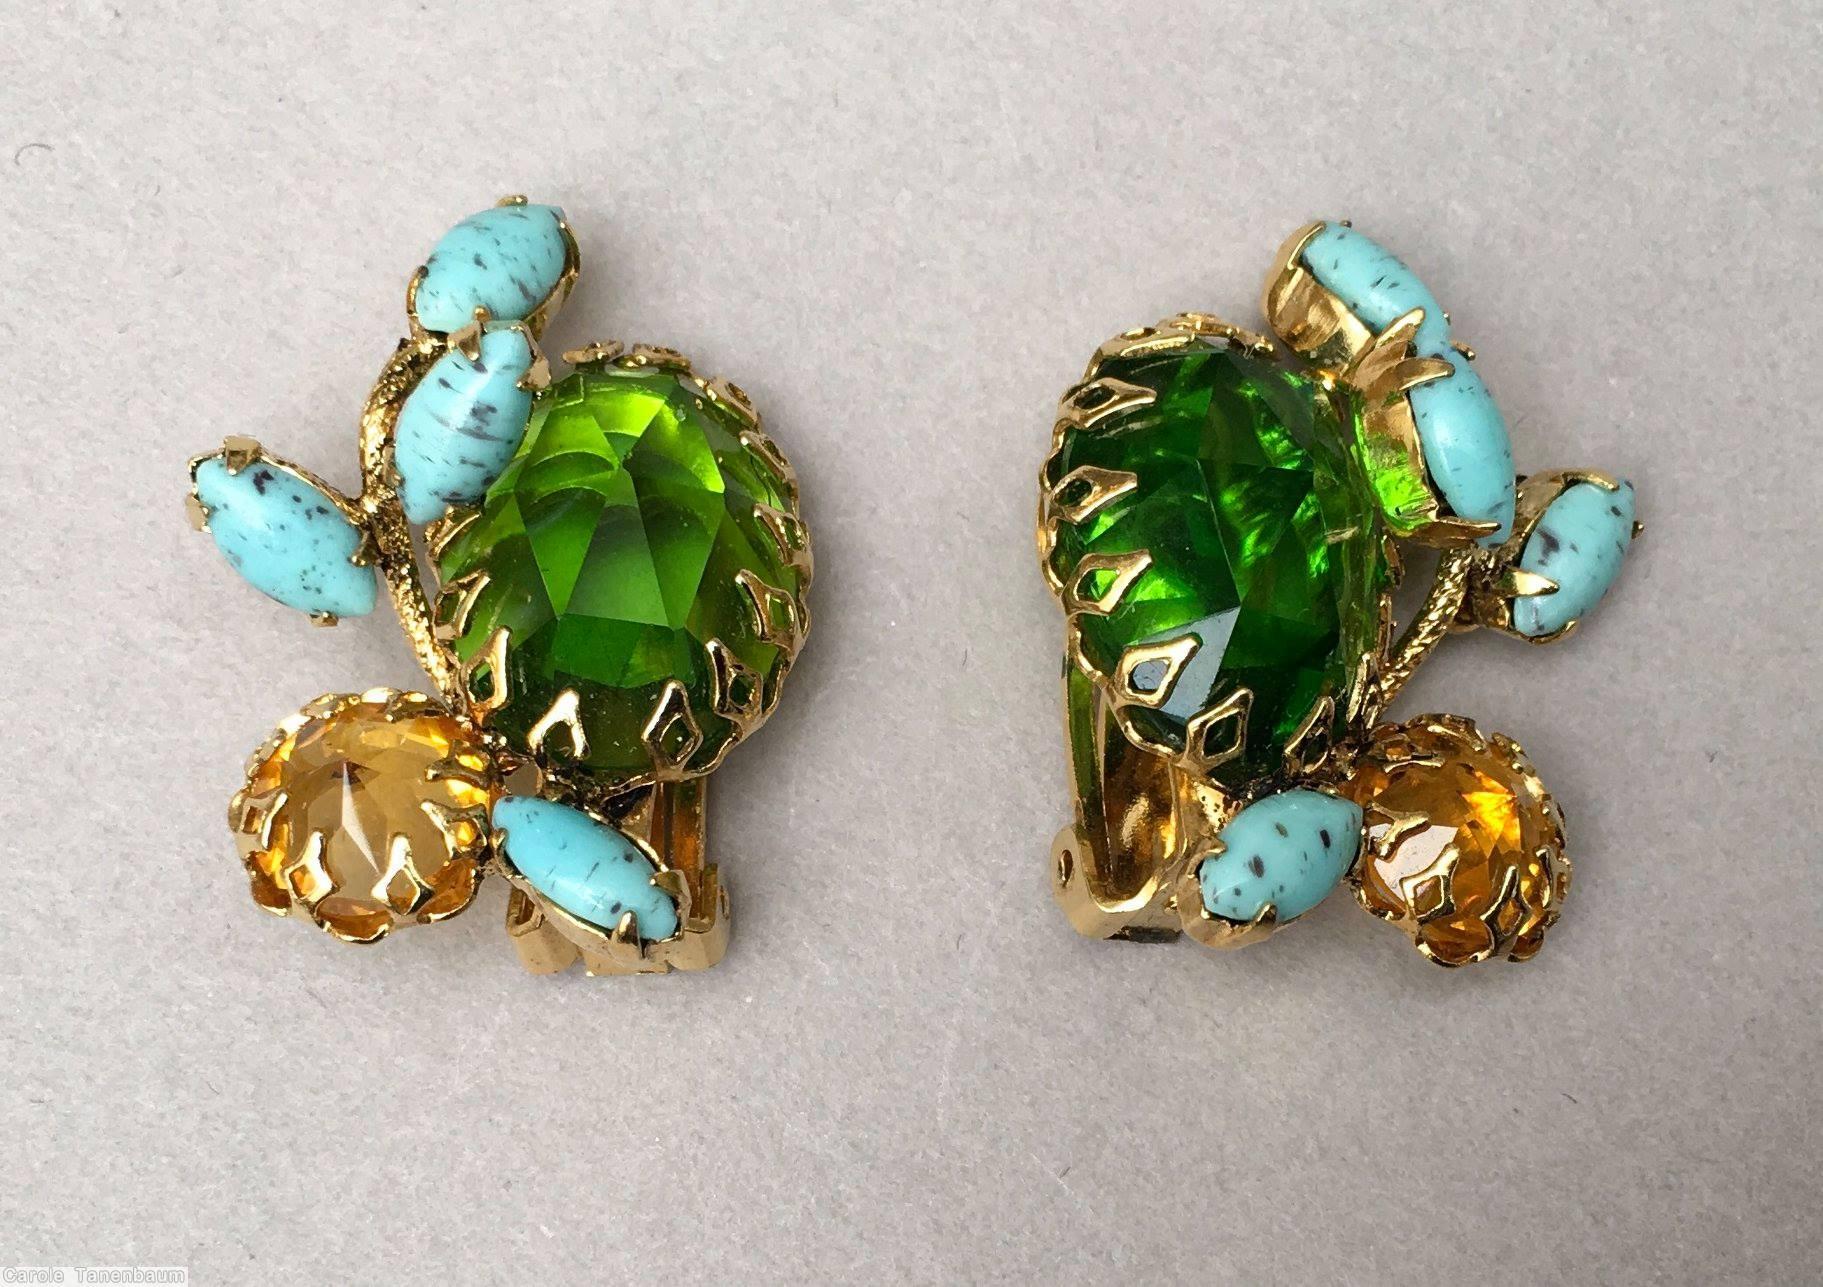 Schreiner 1 large oval cab 1 branch 3 navette 1 large chaton green large oval cab turquoise clear amber goldtone jewelry